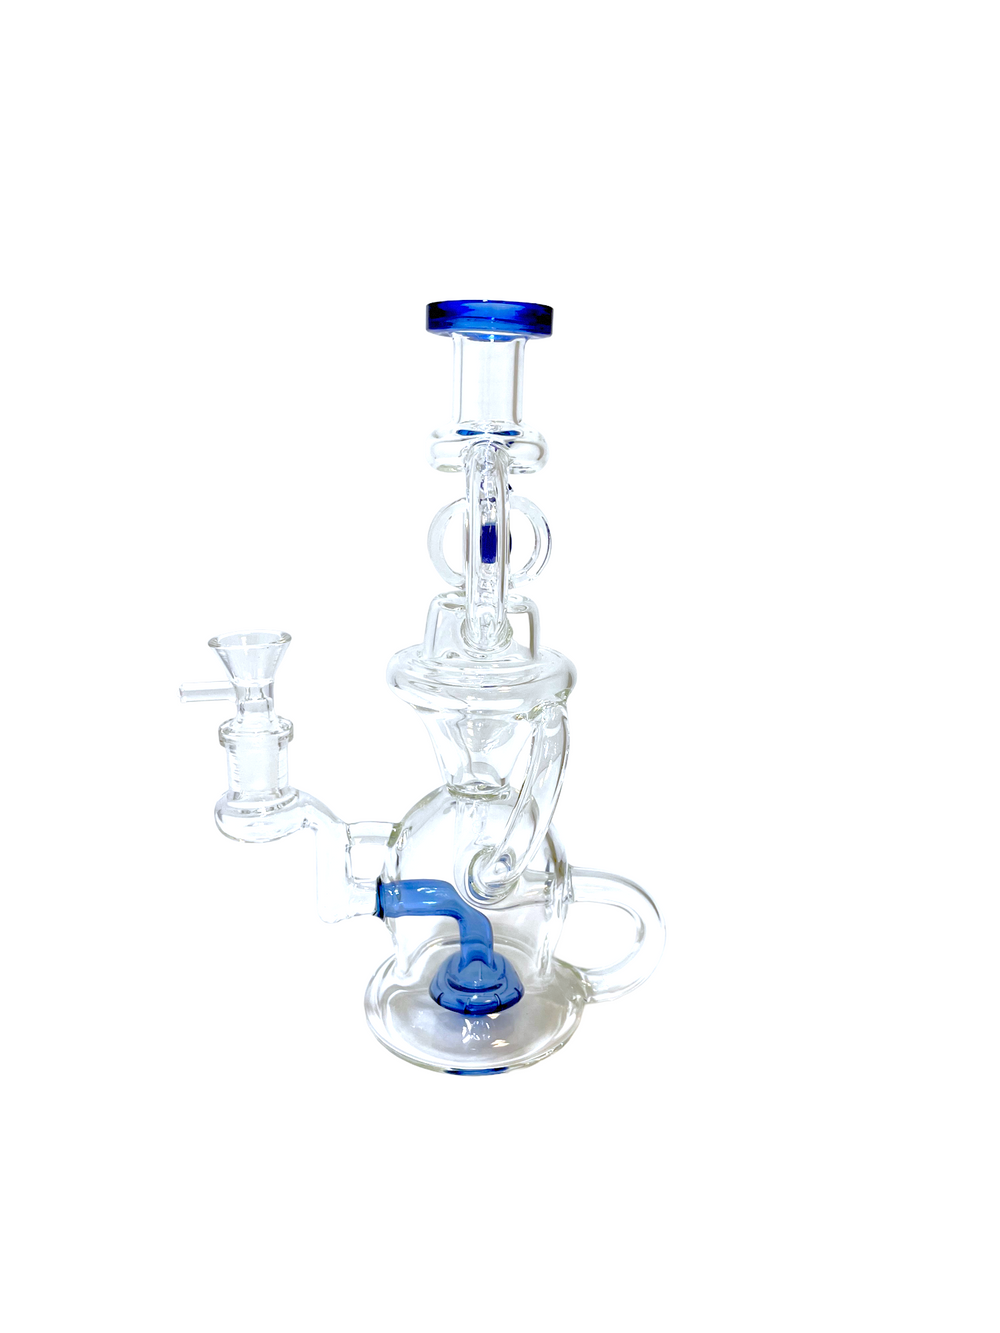 10" Spinning Recycler-BL